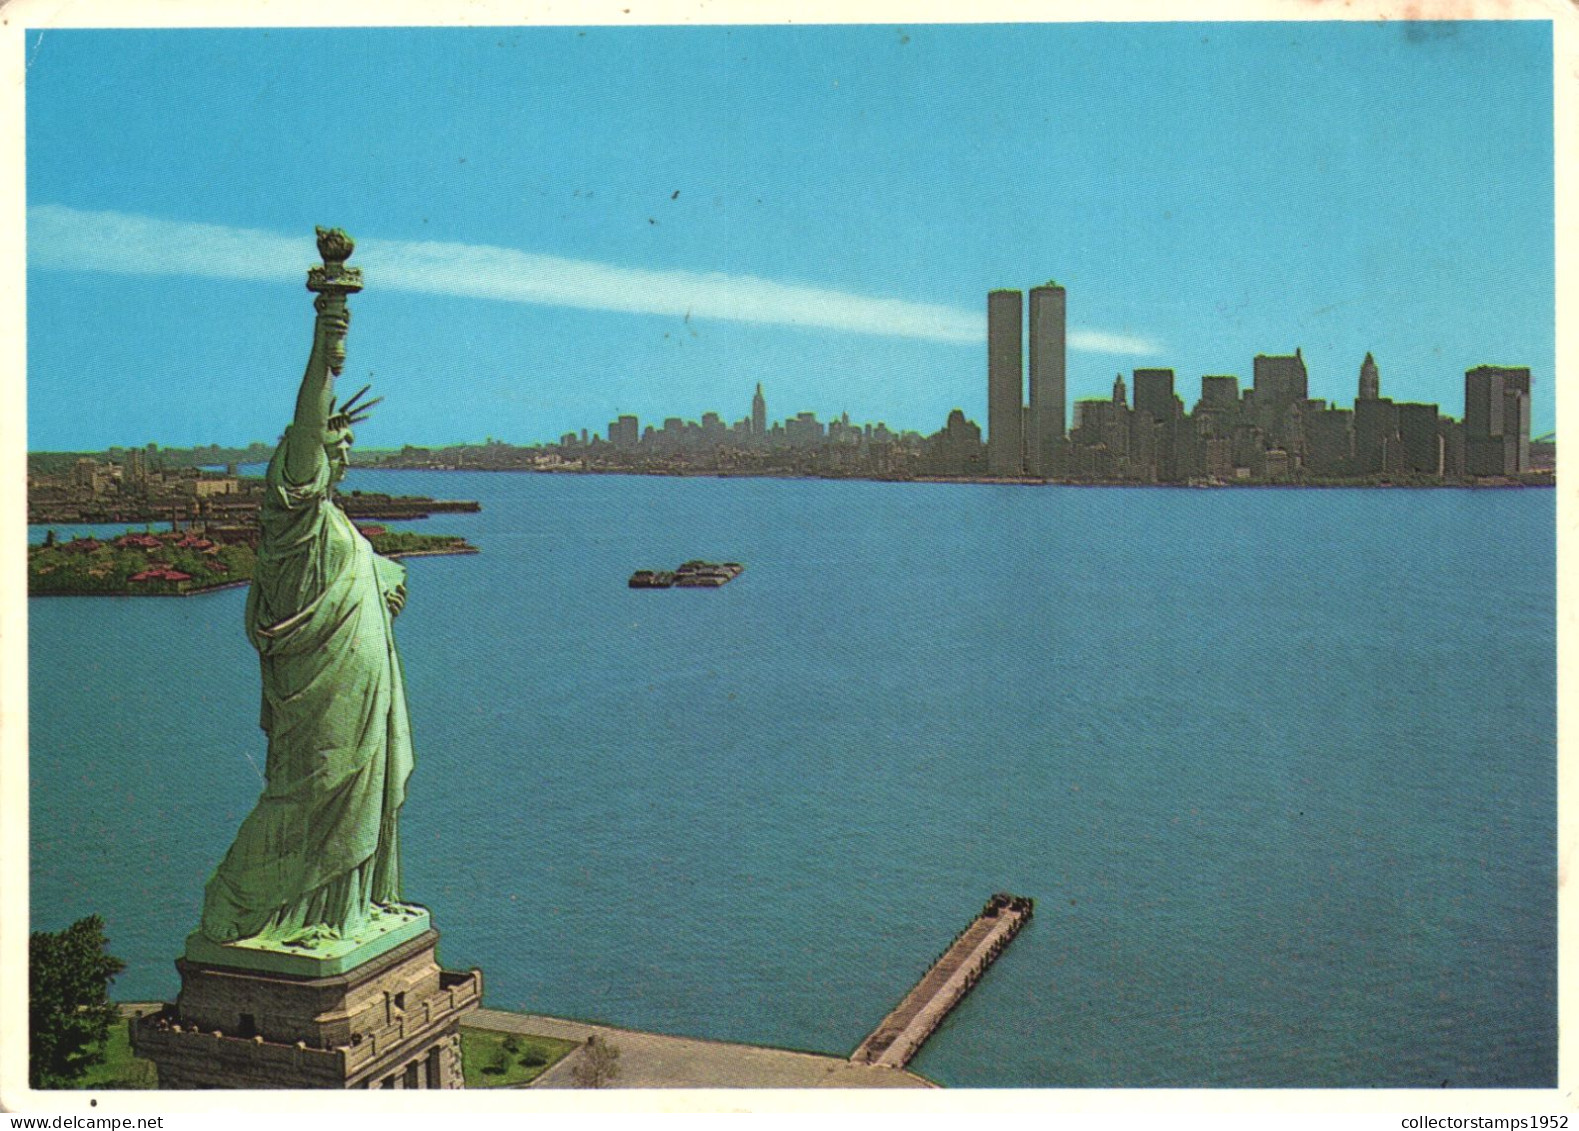 UNITED STATES, NEW YORK CITY, STATUE OF LIBERTY, LOWER MANHATTAN SKYLINE, IN THE BACKGROUND, PANORAMA - Statue Of Liberty